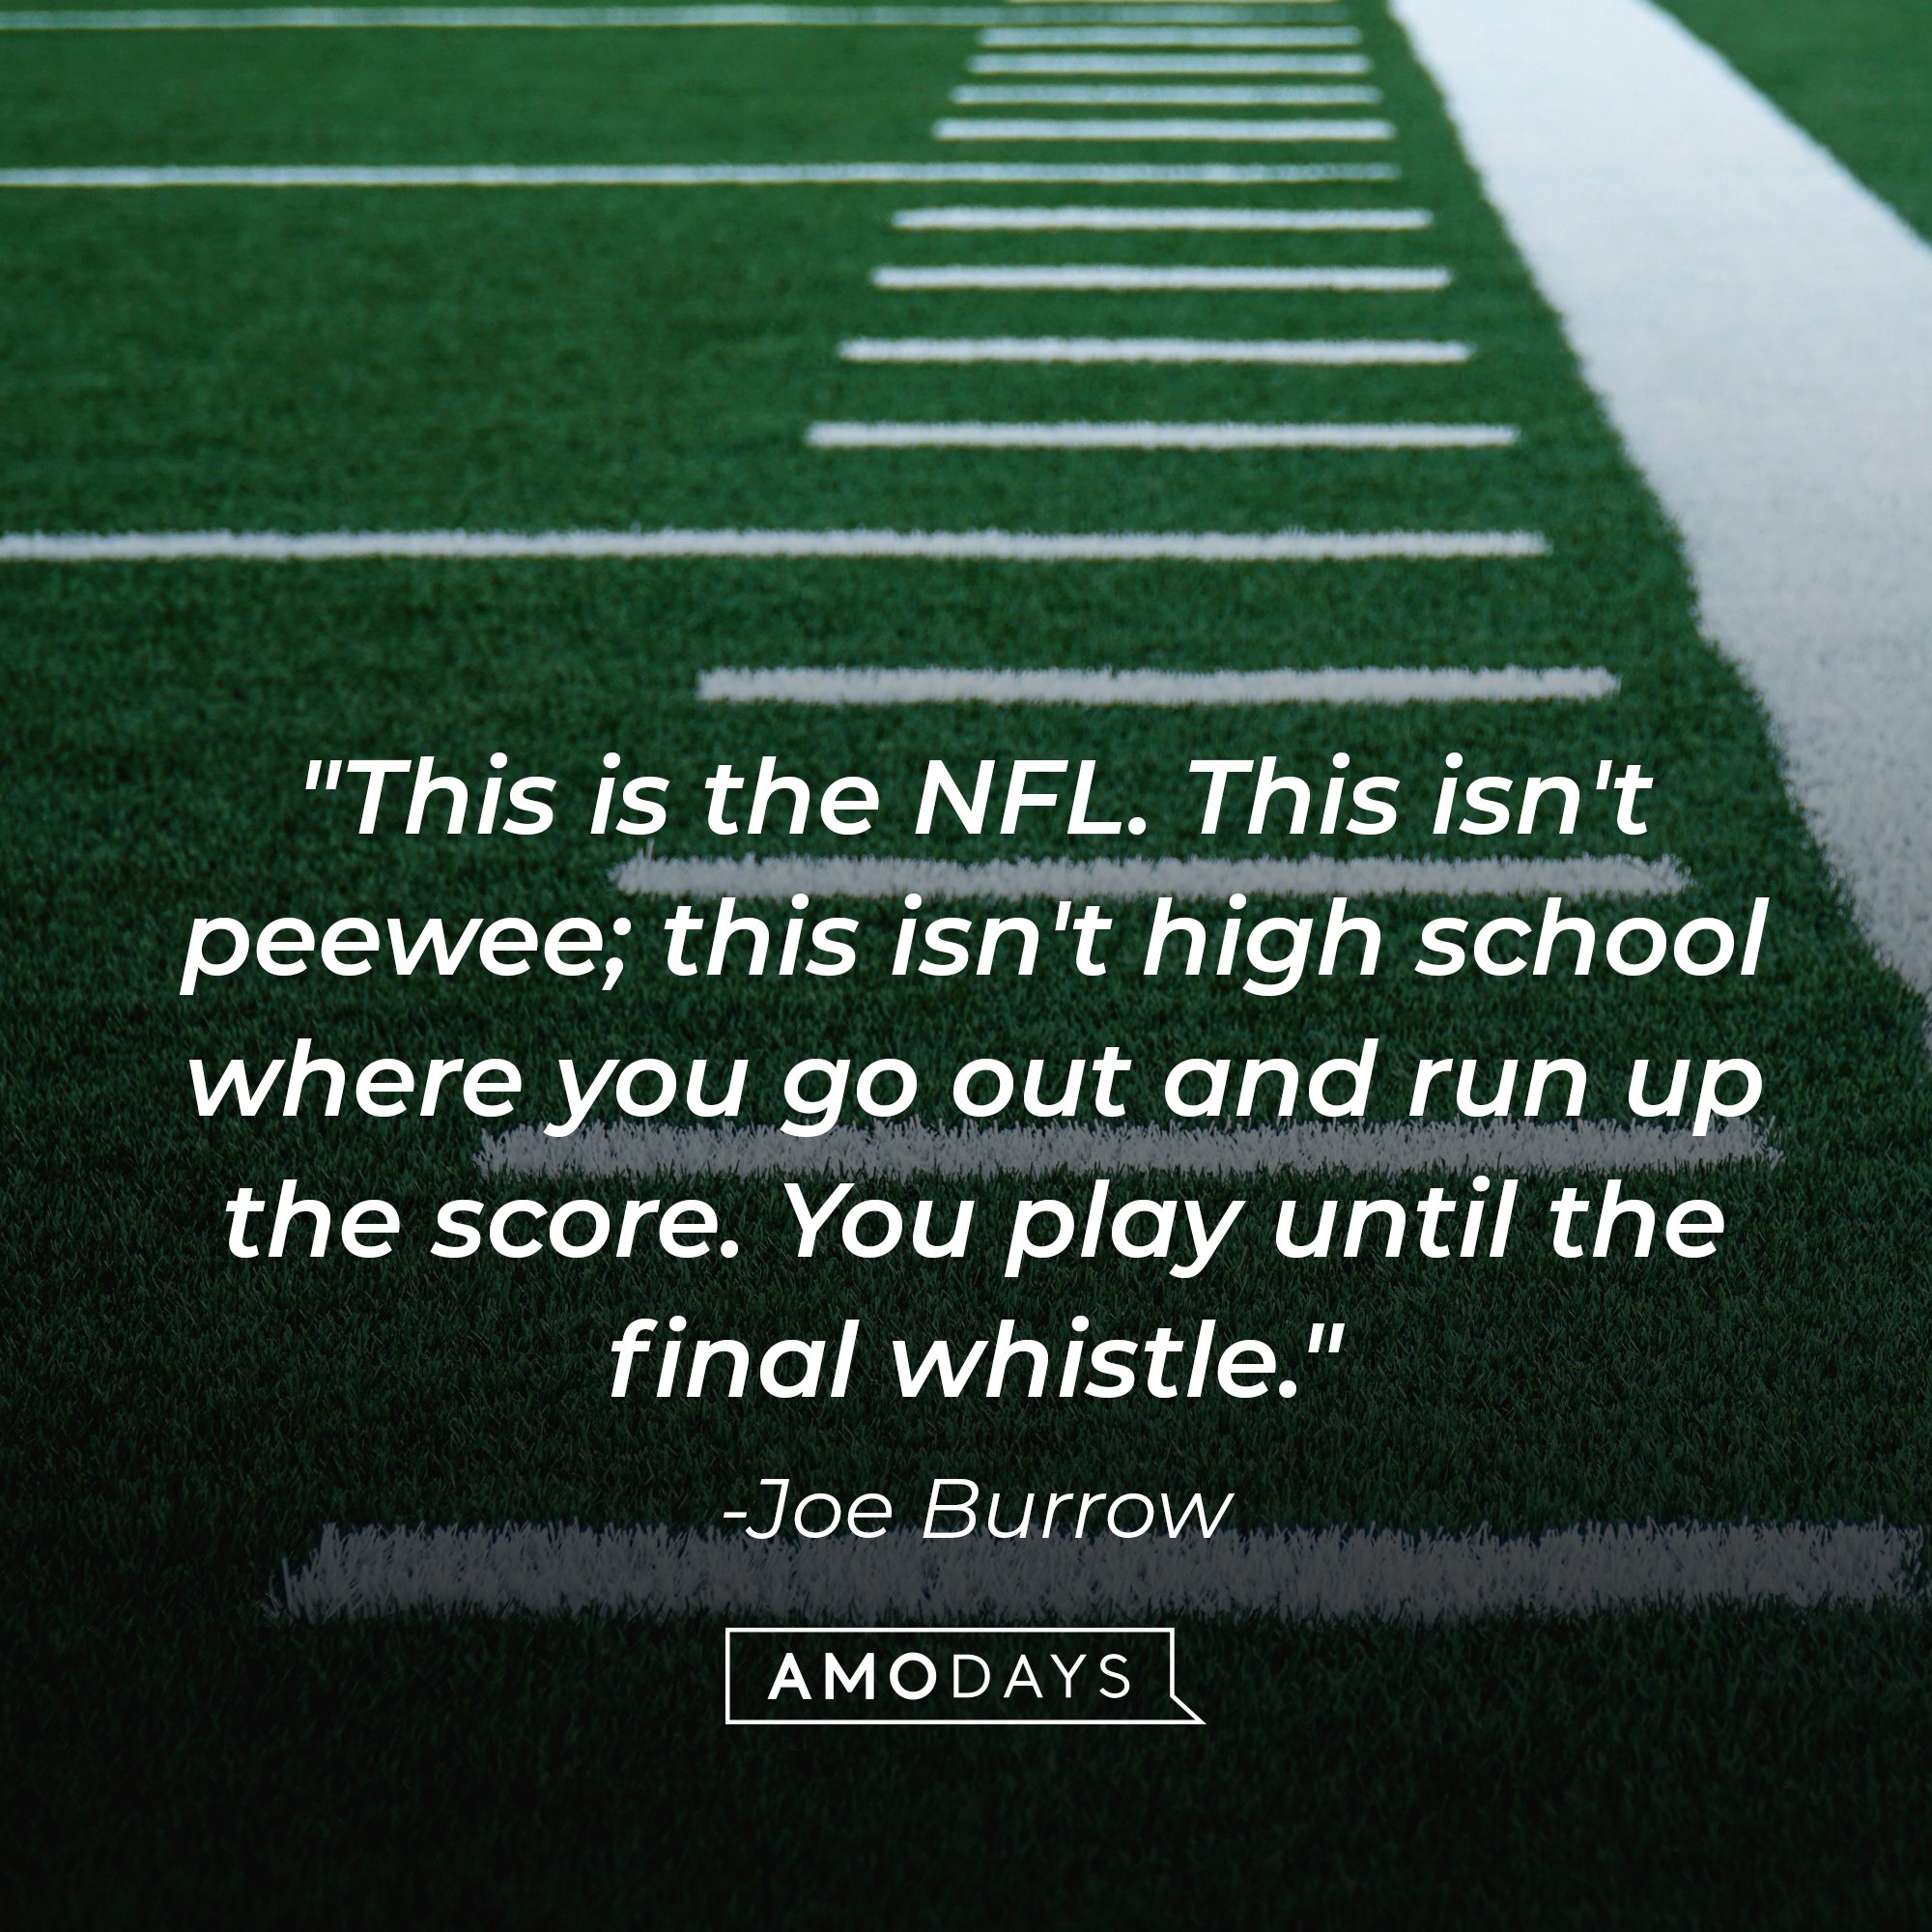  Joe Burrow’s quote: "This is the NFL. This isn't peewee; this isn't high school where you go out and run up the score. You play until the final whistle.” | Image: AmoDays